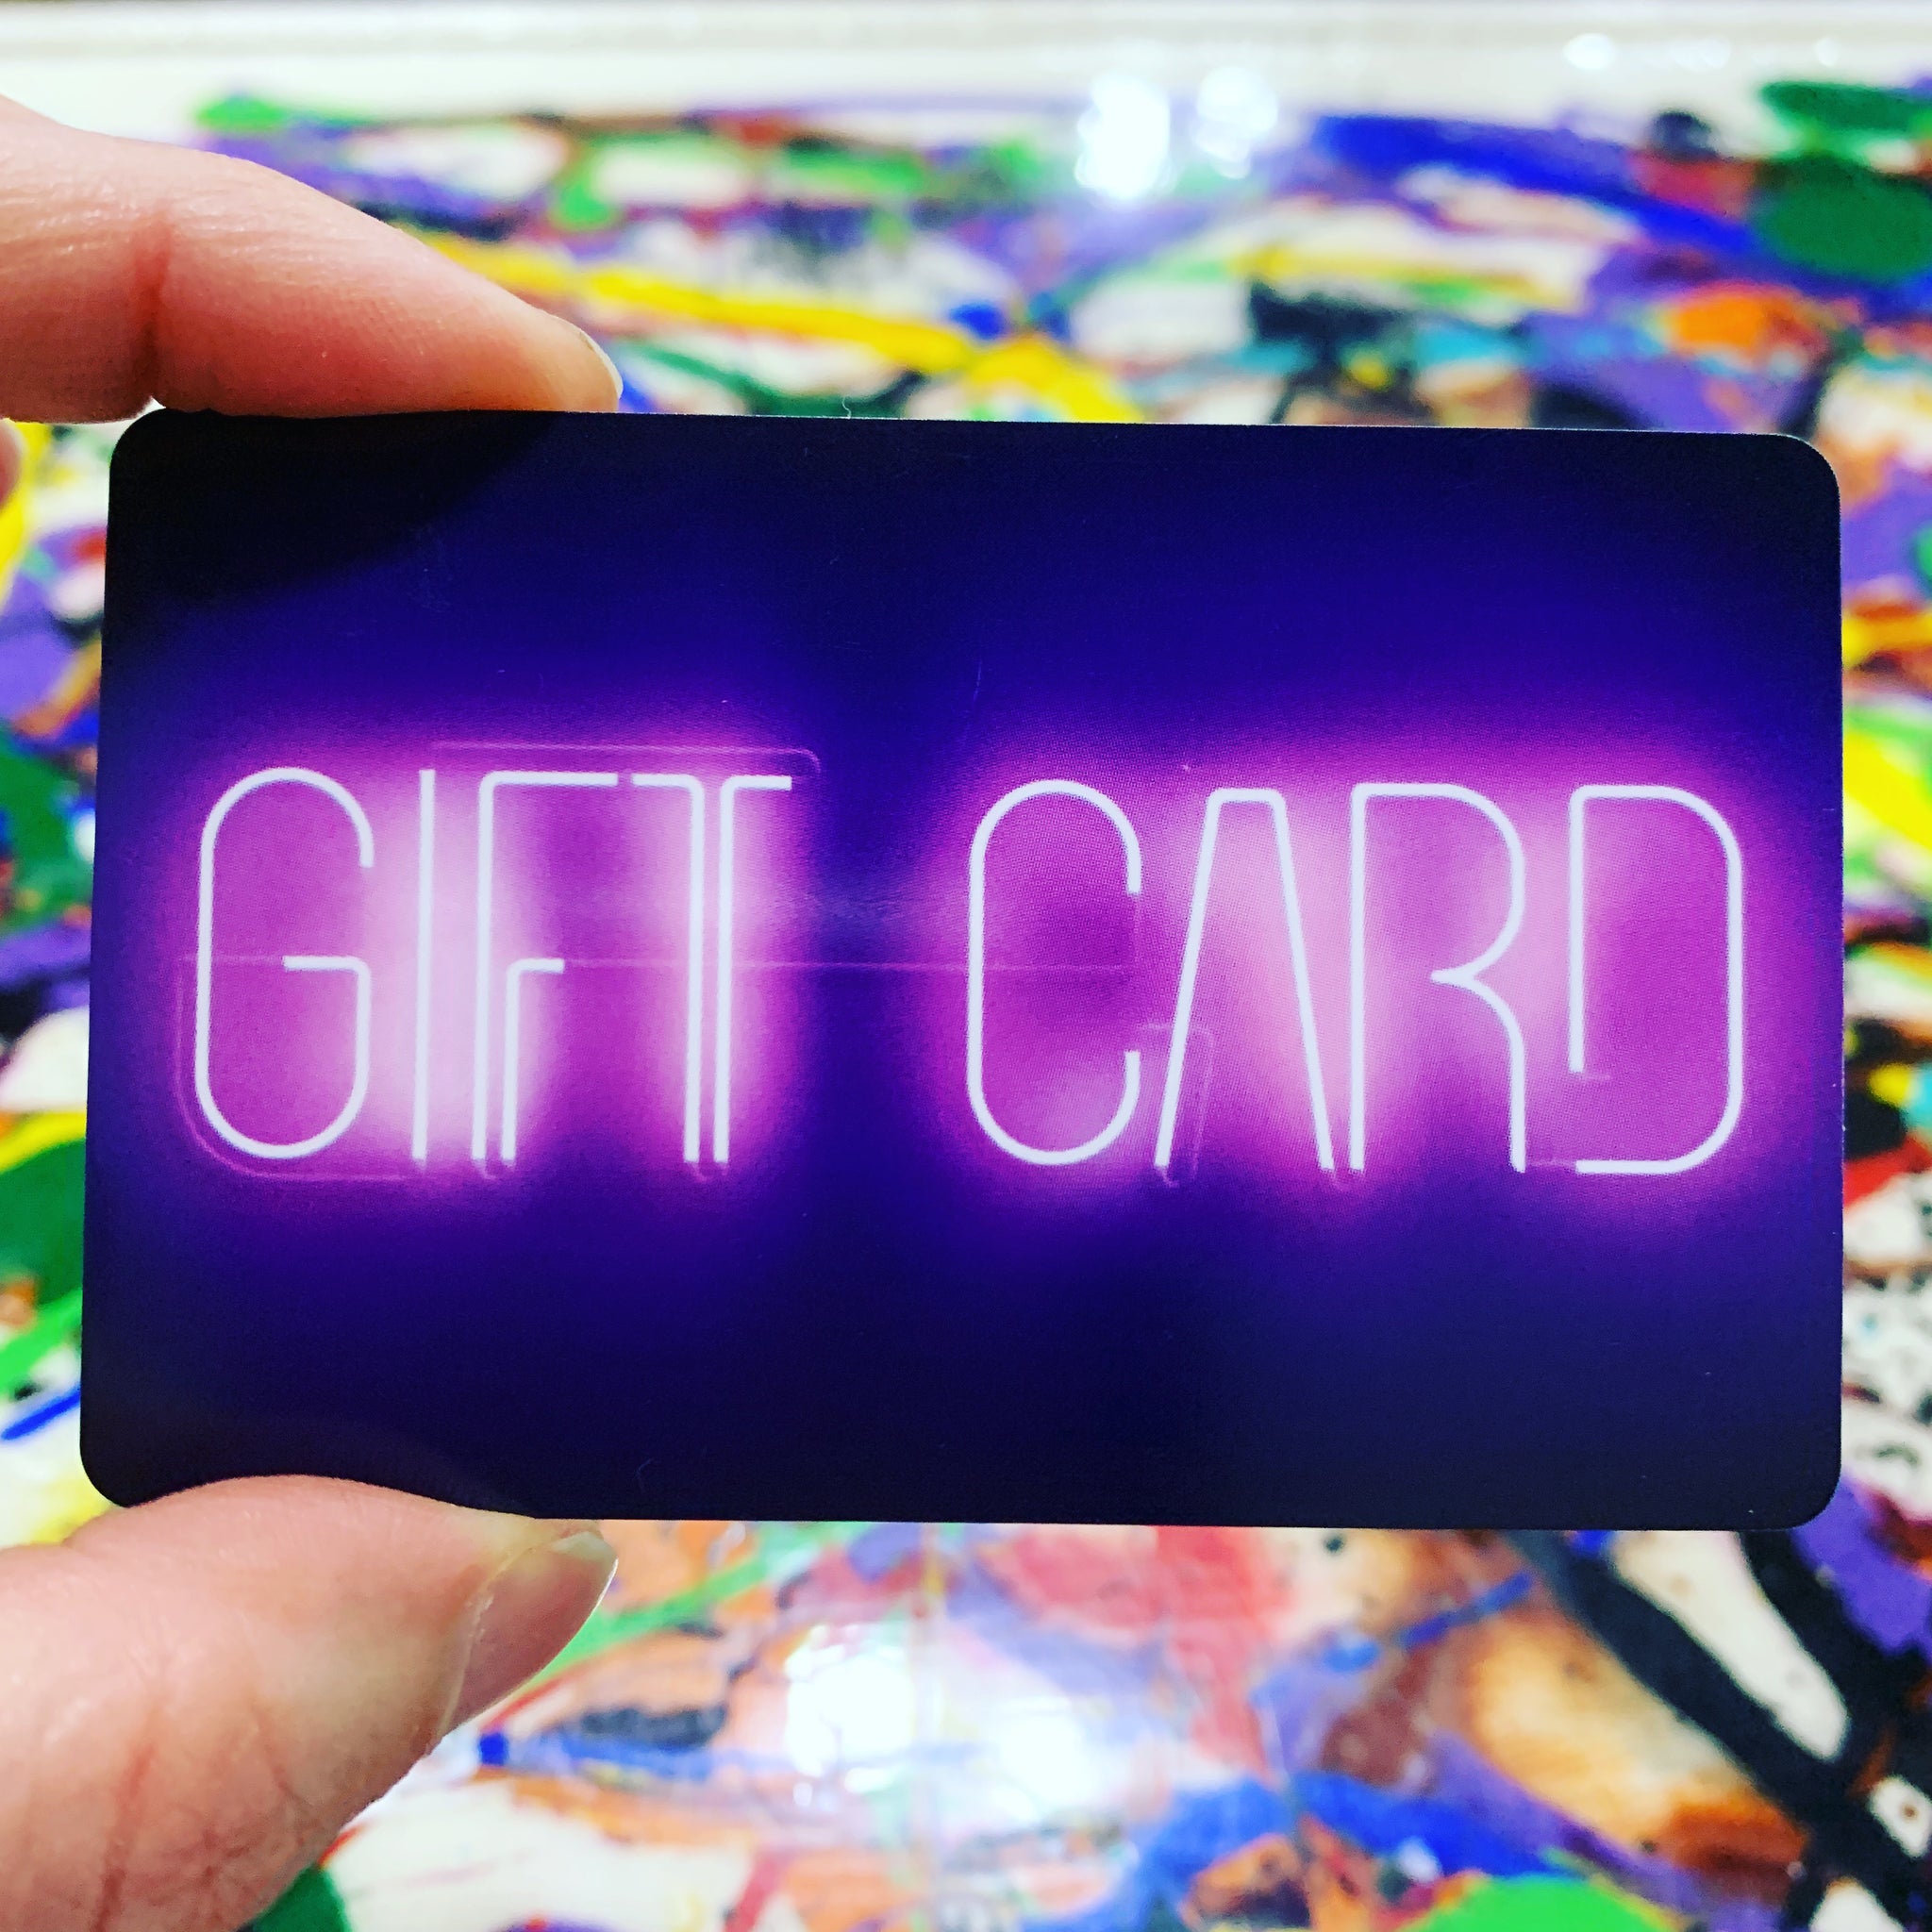 Gift Card for $50